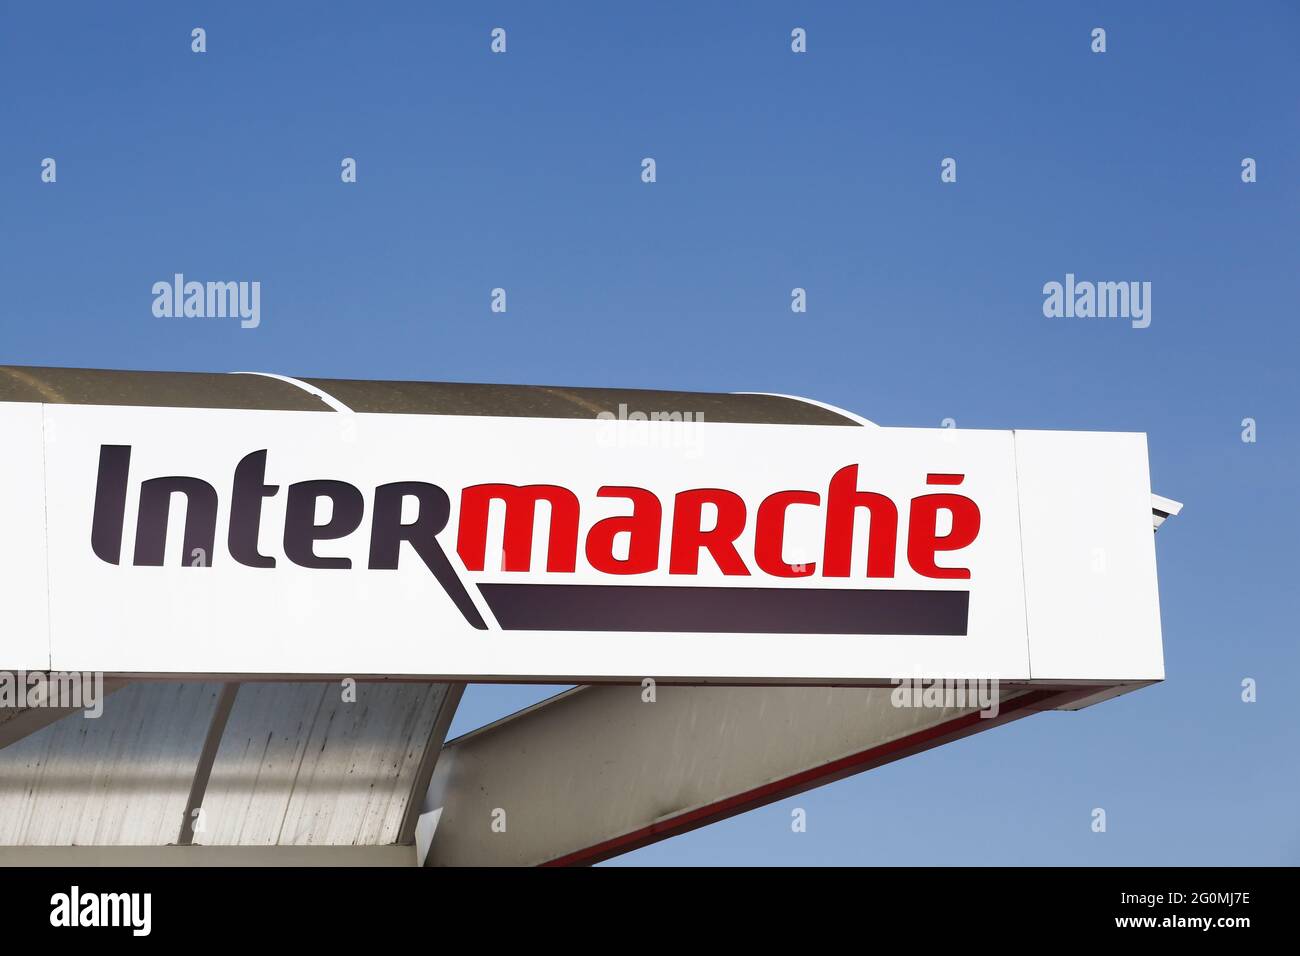 La Clayette, France - September 12, 2020: Intermarche logo on a building. Intermarche is the brand of a general commercial french supermarket Stock Photo